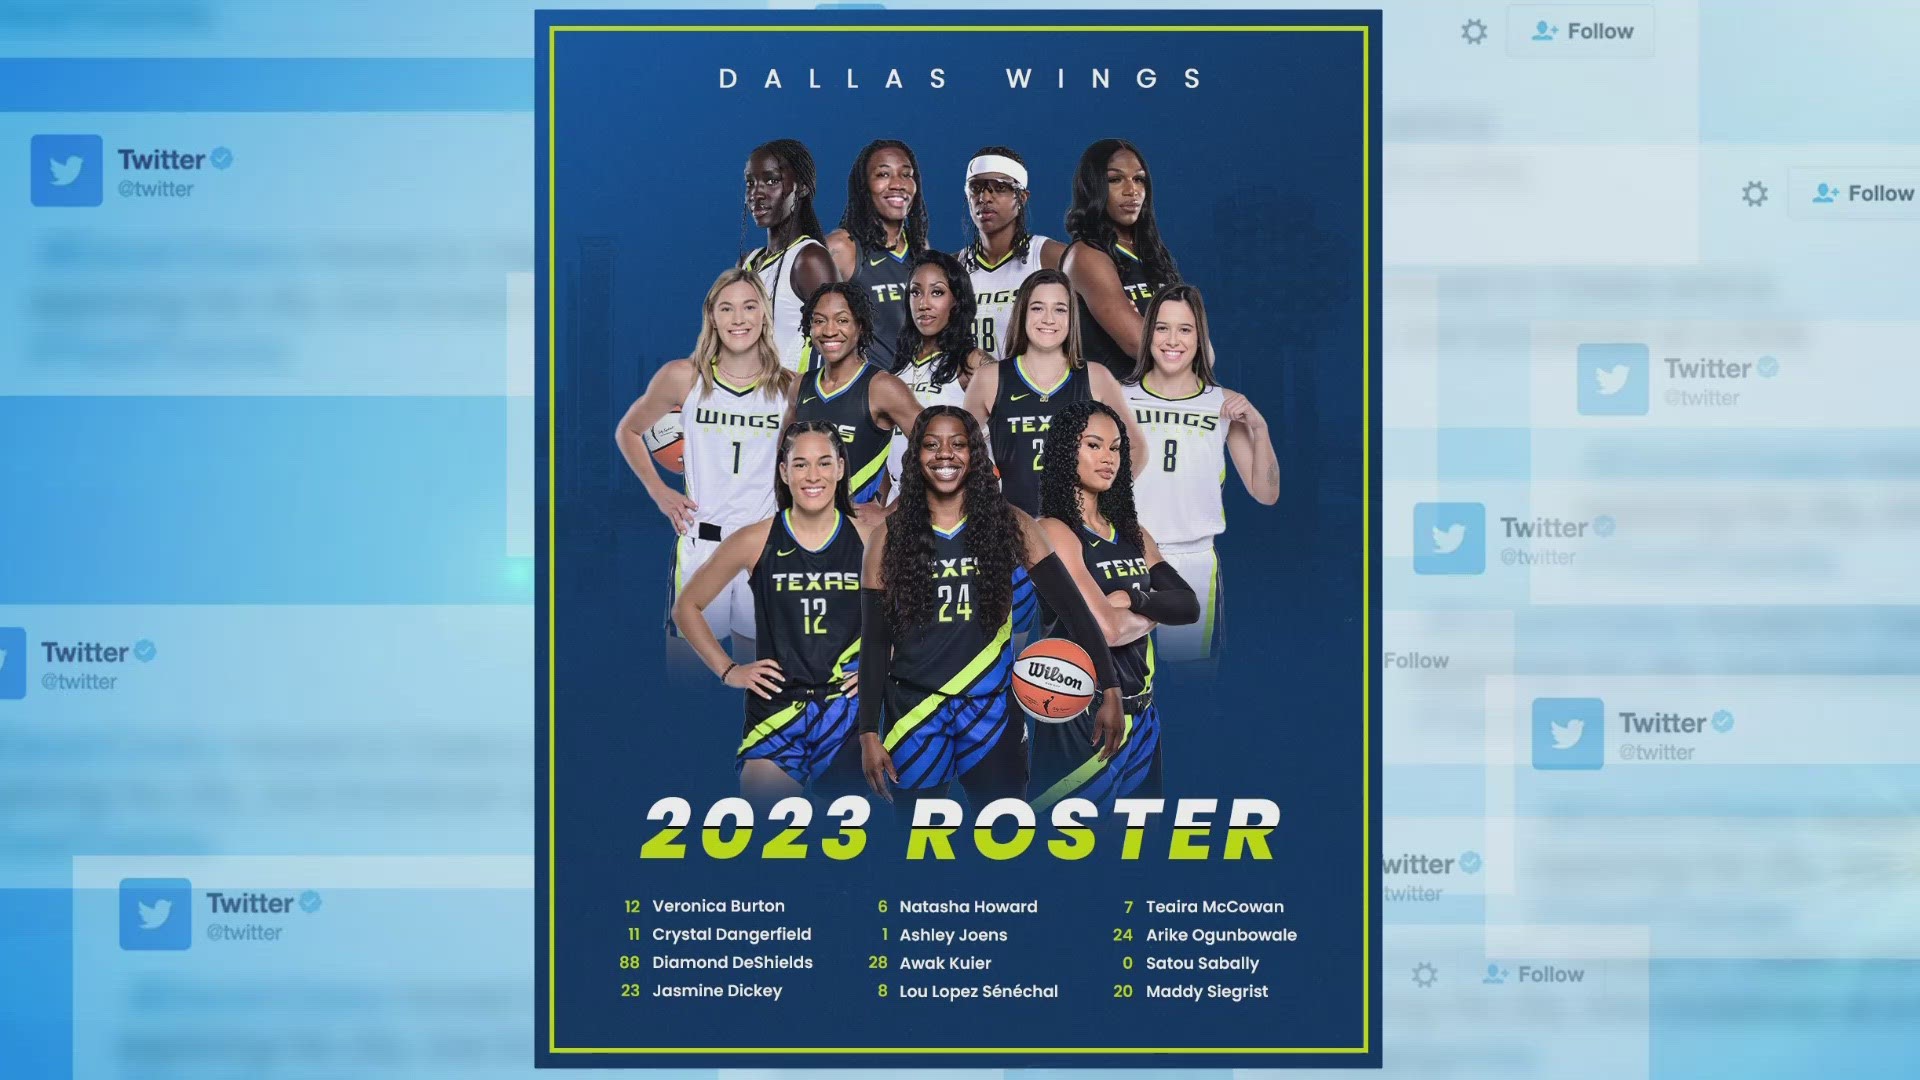 Joens was picked No. 19 overall in the 2023 WNBA Draft.